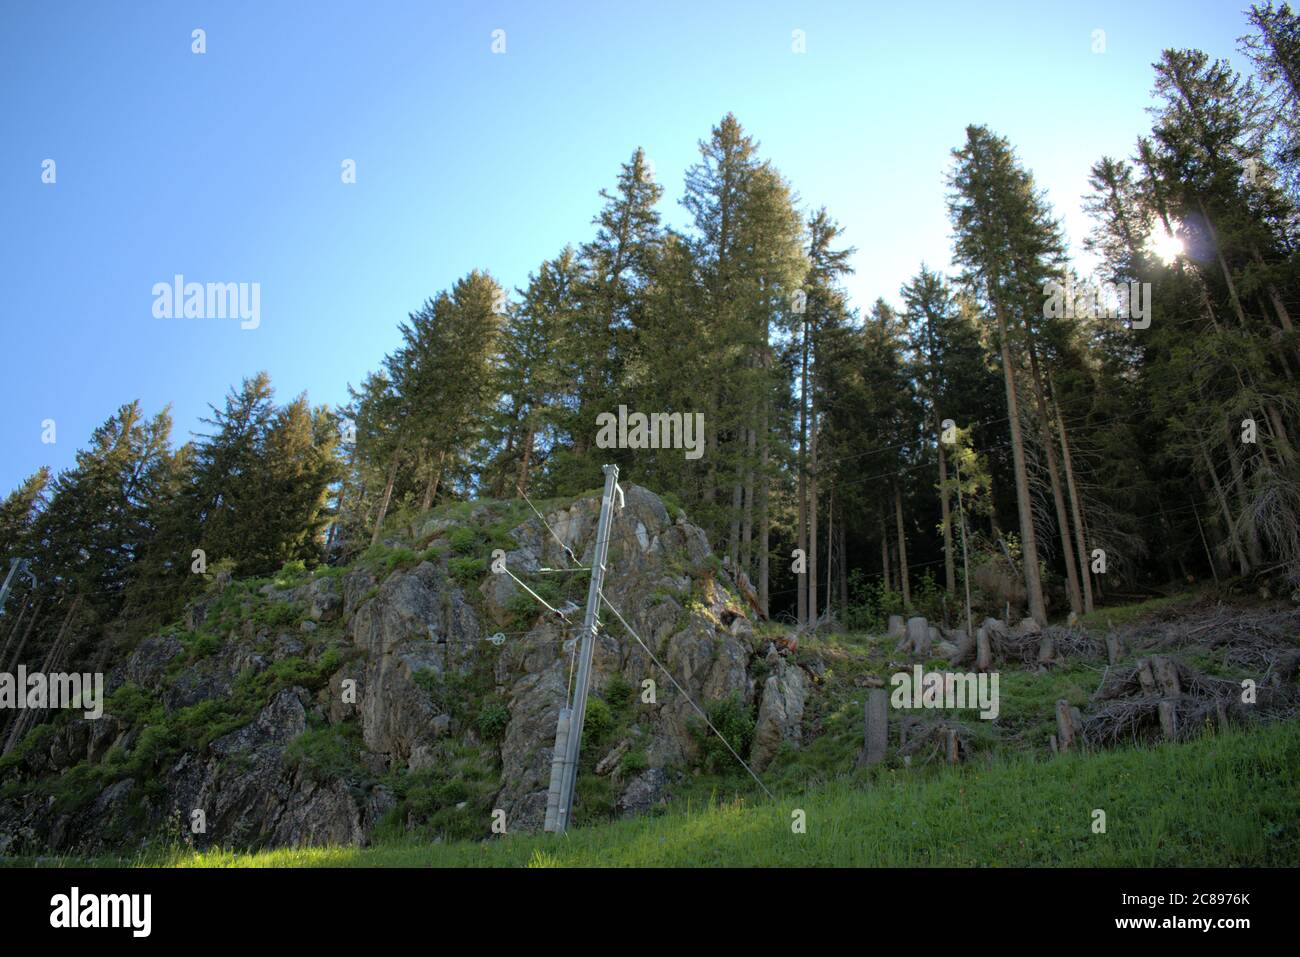 Fir trees rising up into the blue sky in Davos Switzerland Stock Photo